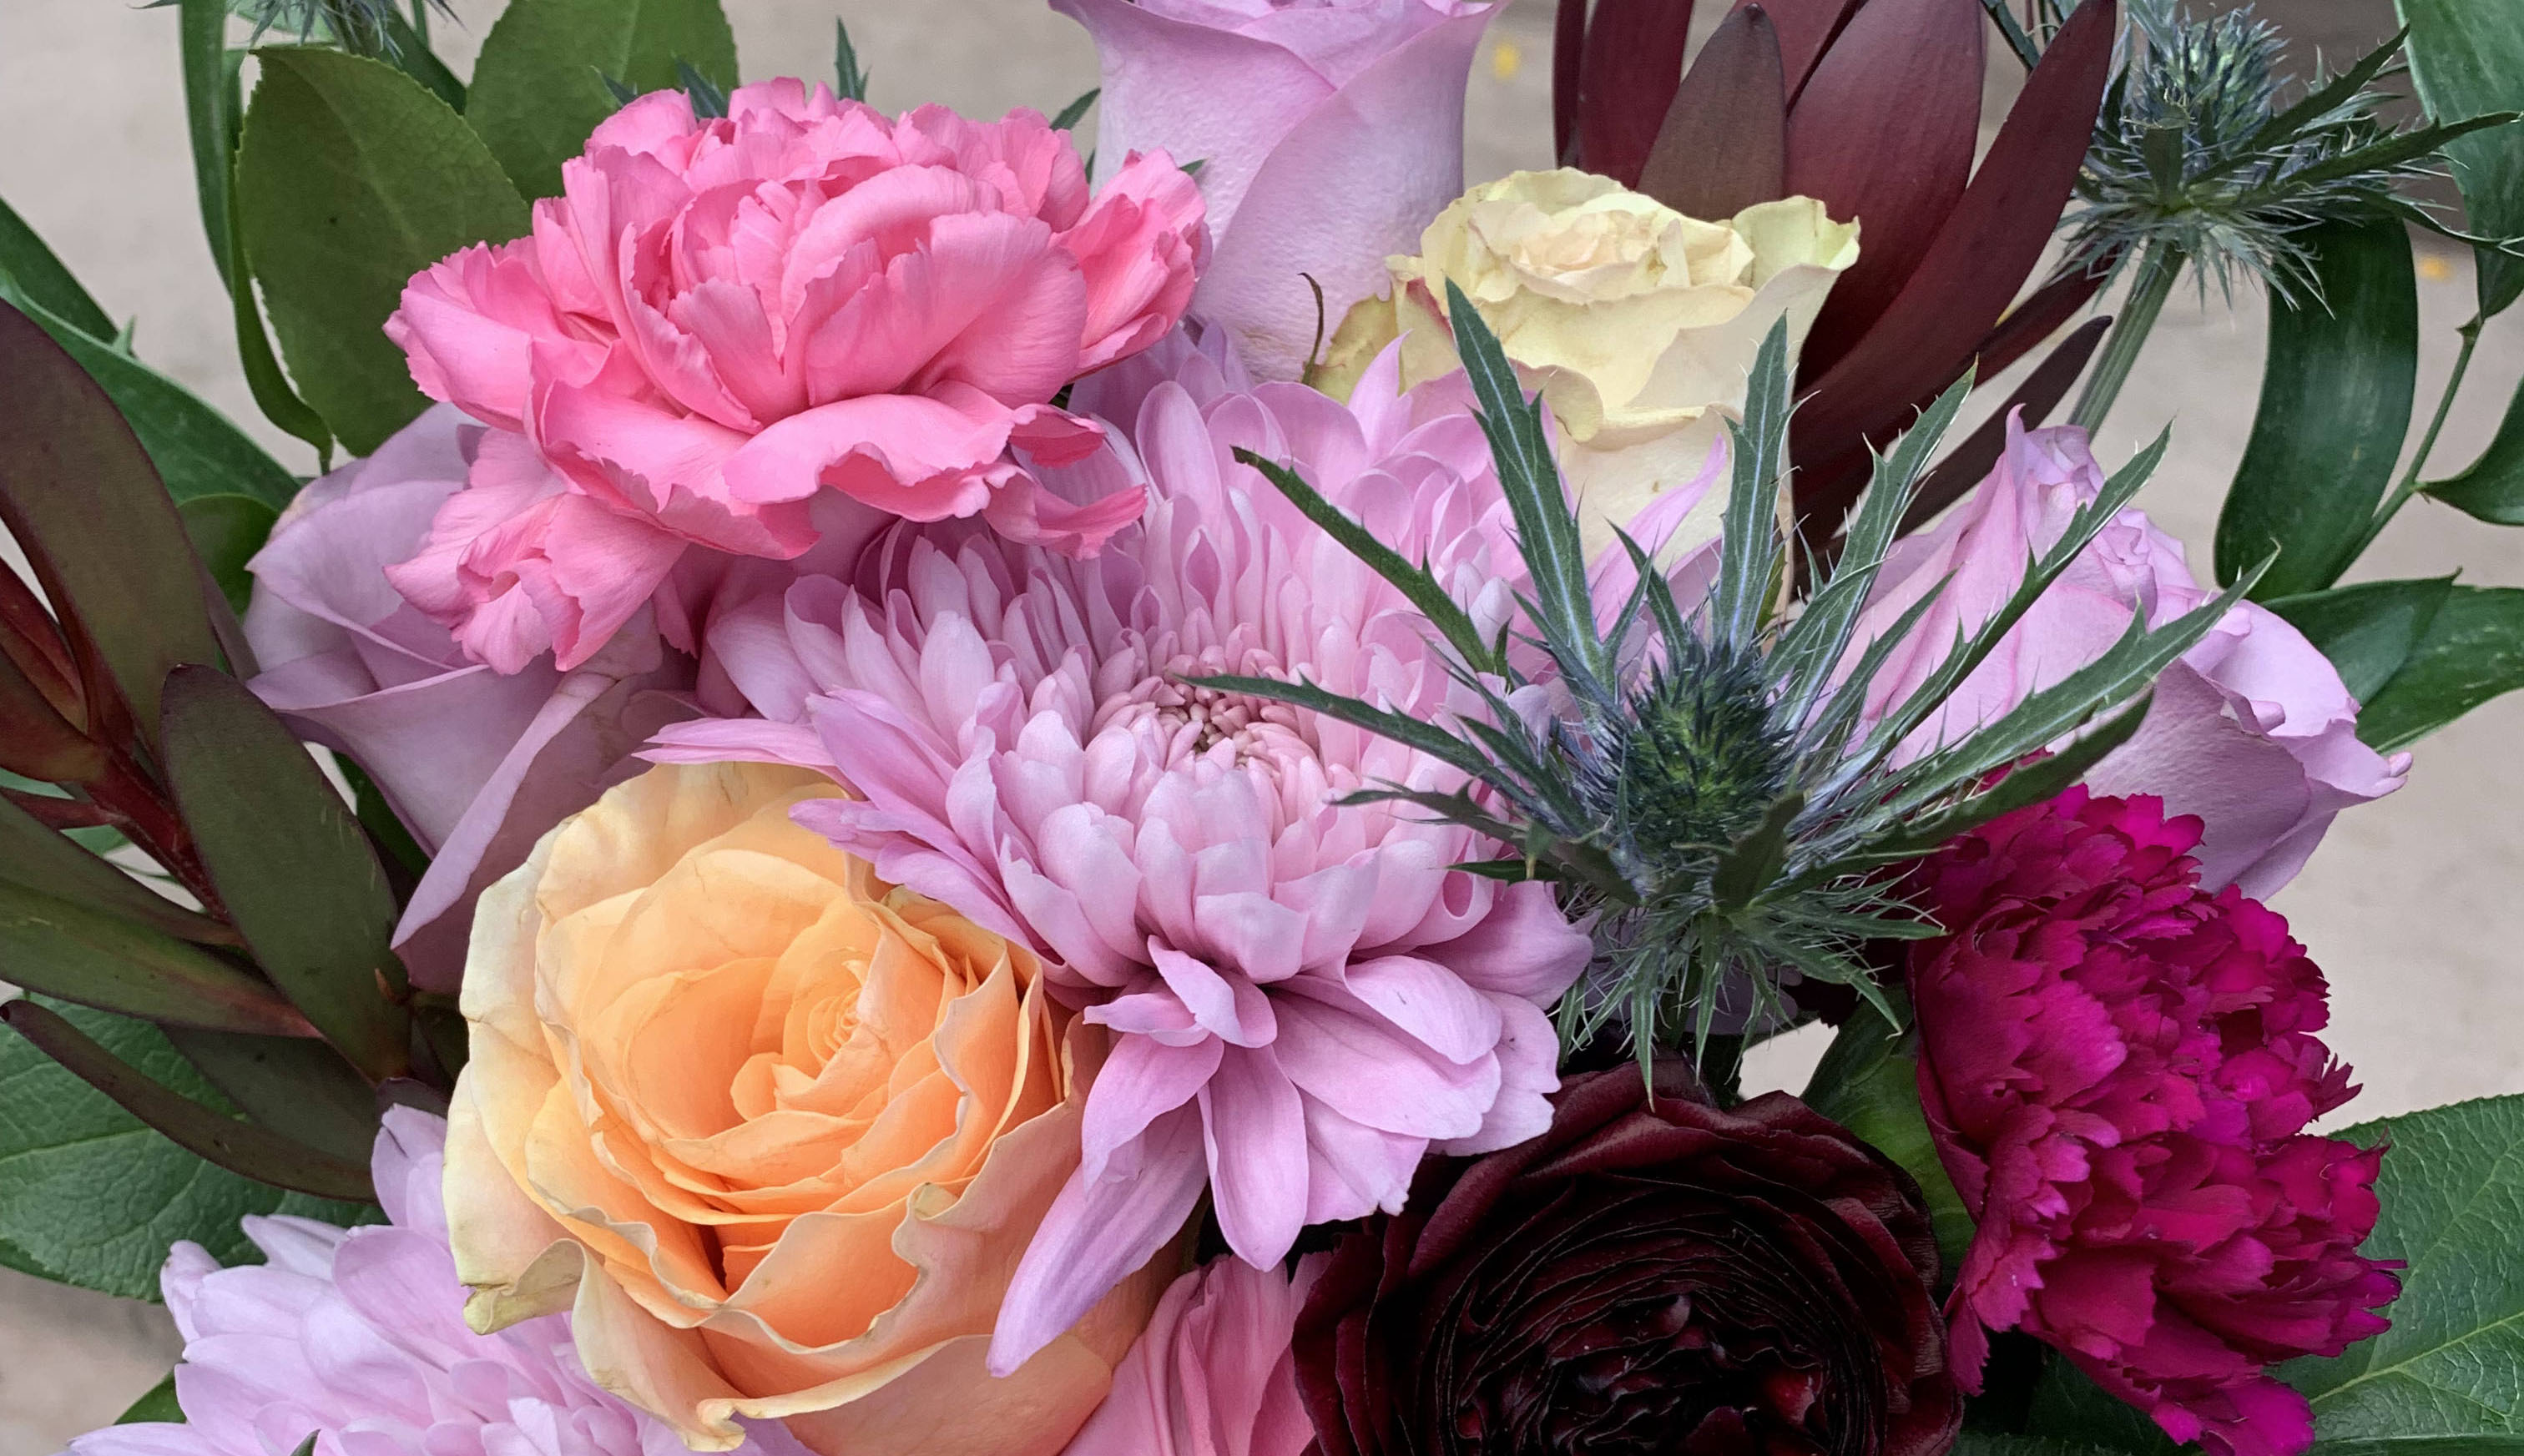 Close up of a bouquet containing January's birth flower, the carnation